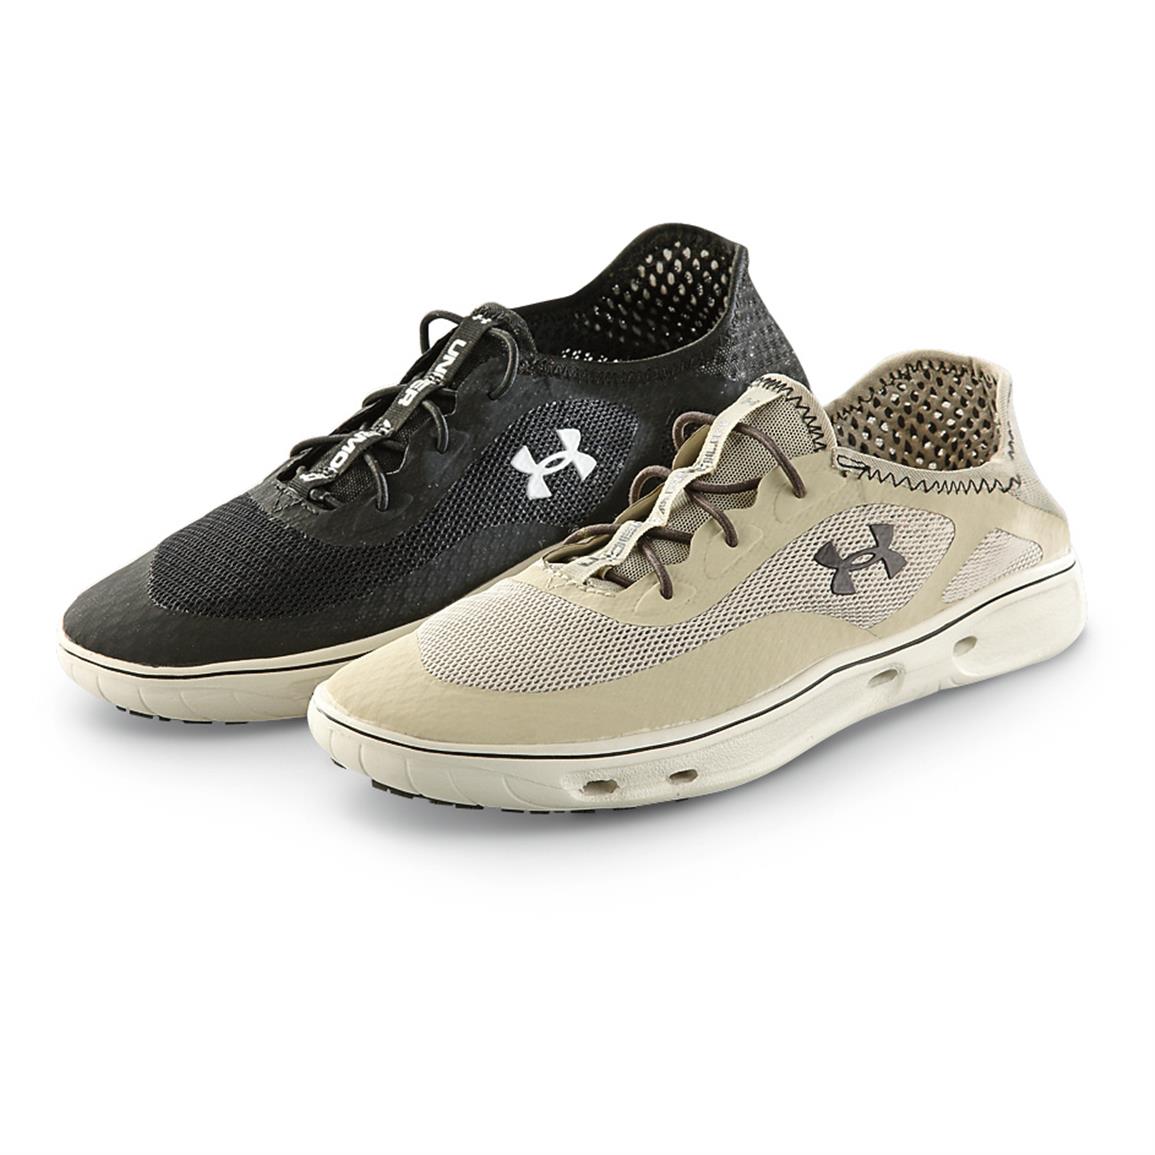 Under Armour Hydro Deck Boat Shoes 619528, Boat & Water